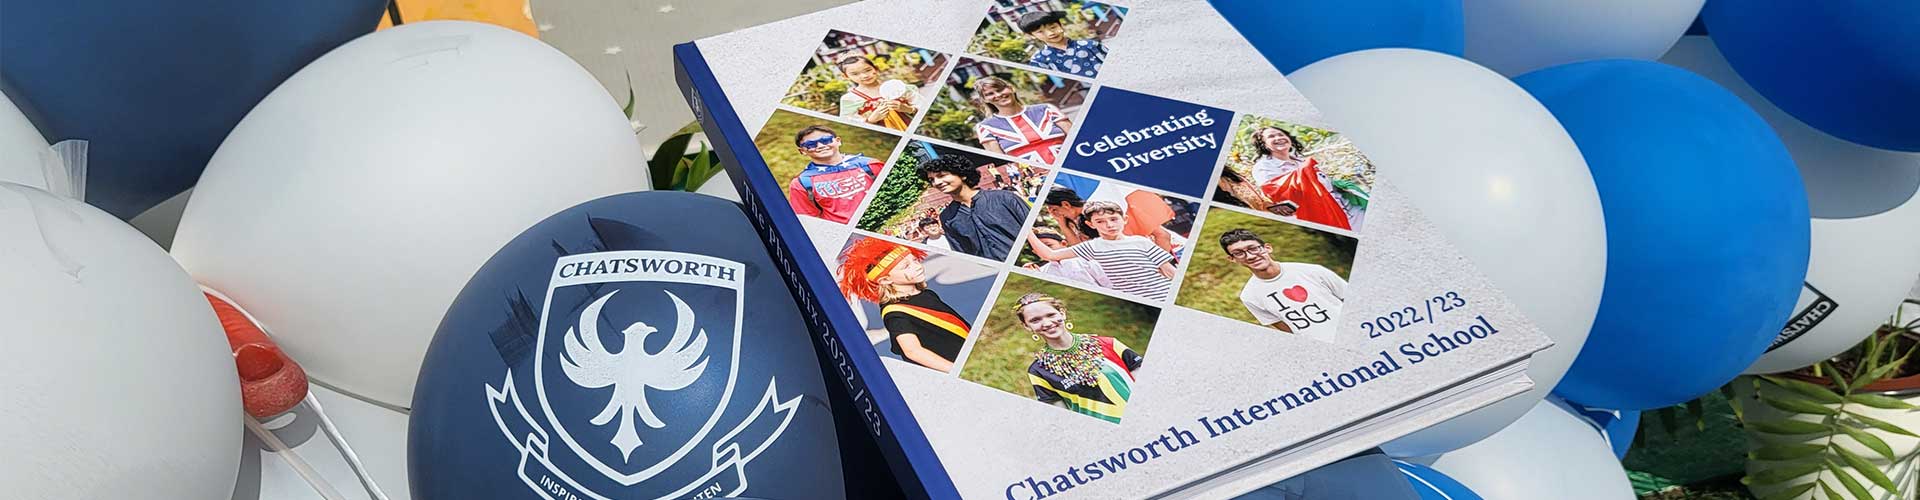 At Chatsworth we are committed to providing an excellent international education at exceptional value